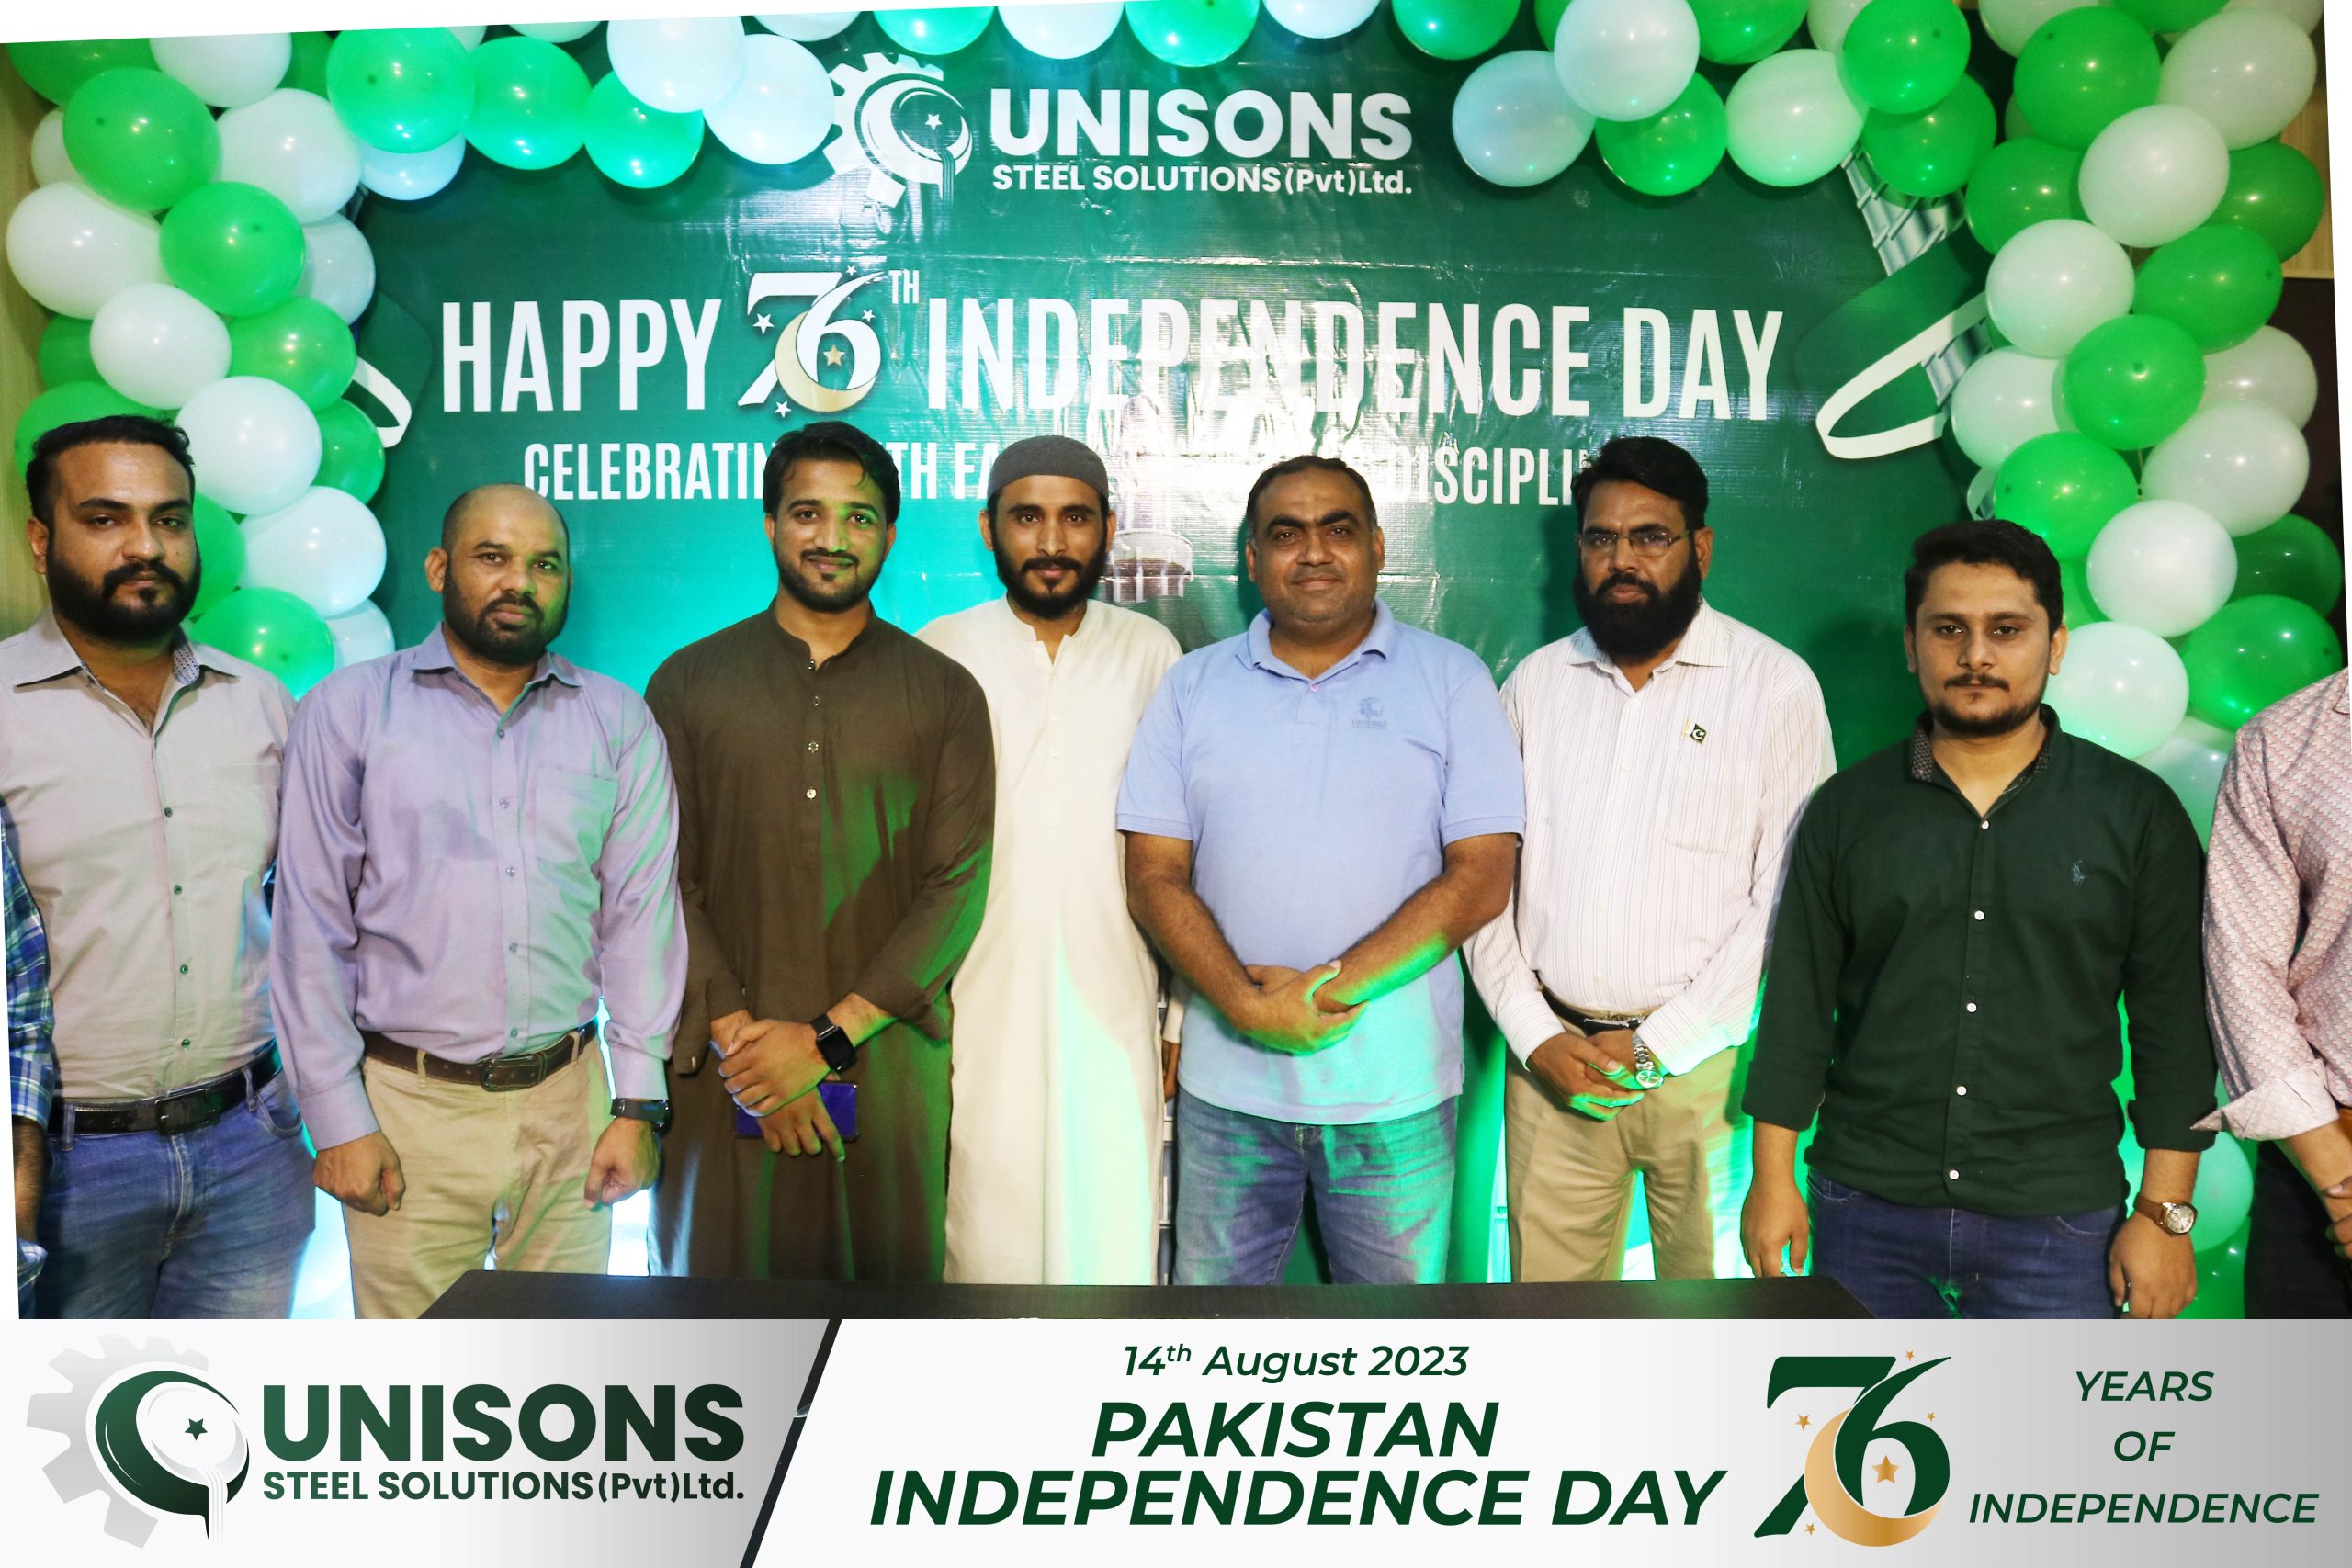 Pakistan 76th independence day celebrations at Unisons Steel Solutions Pvt Ltd